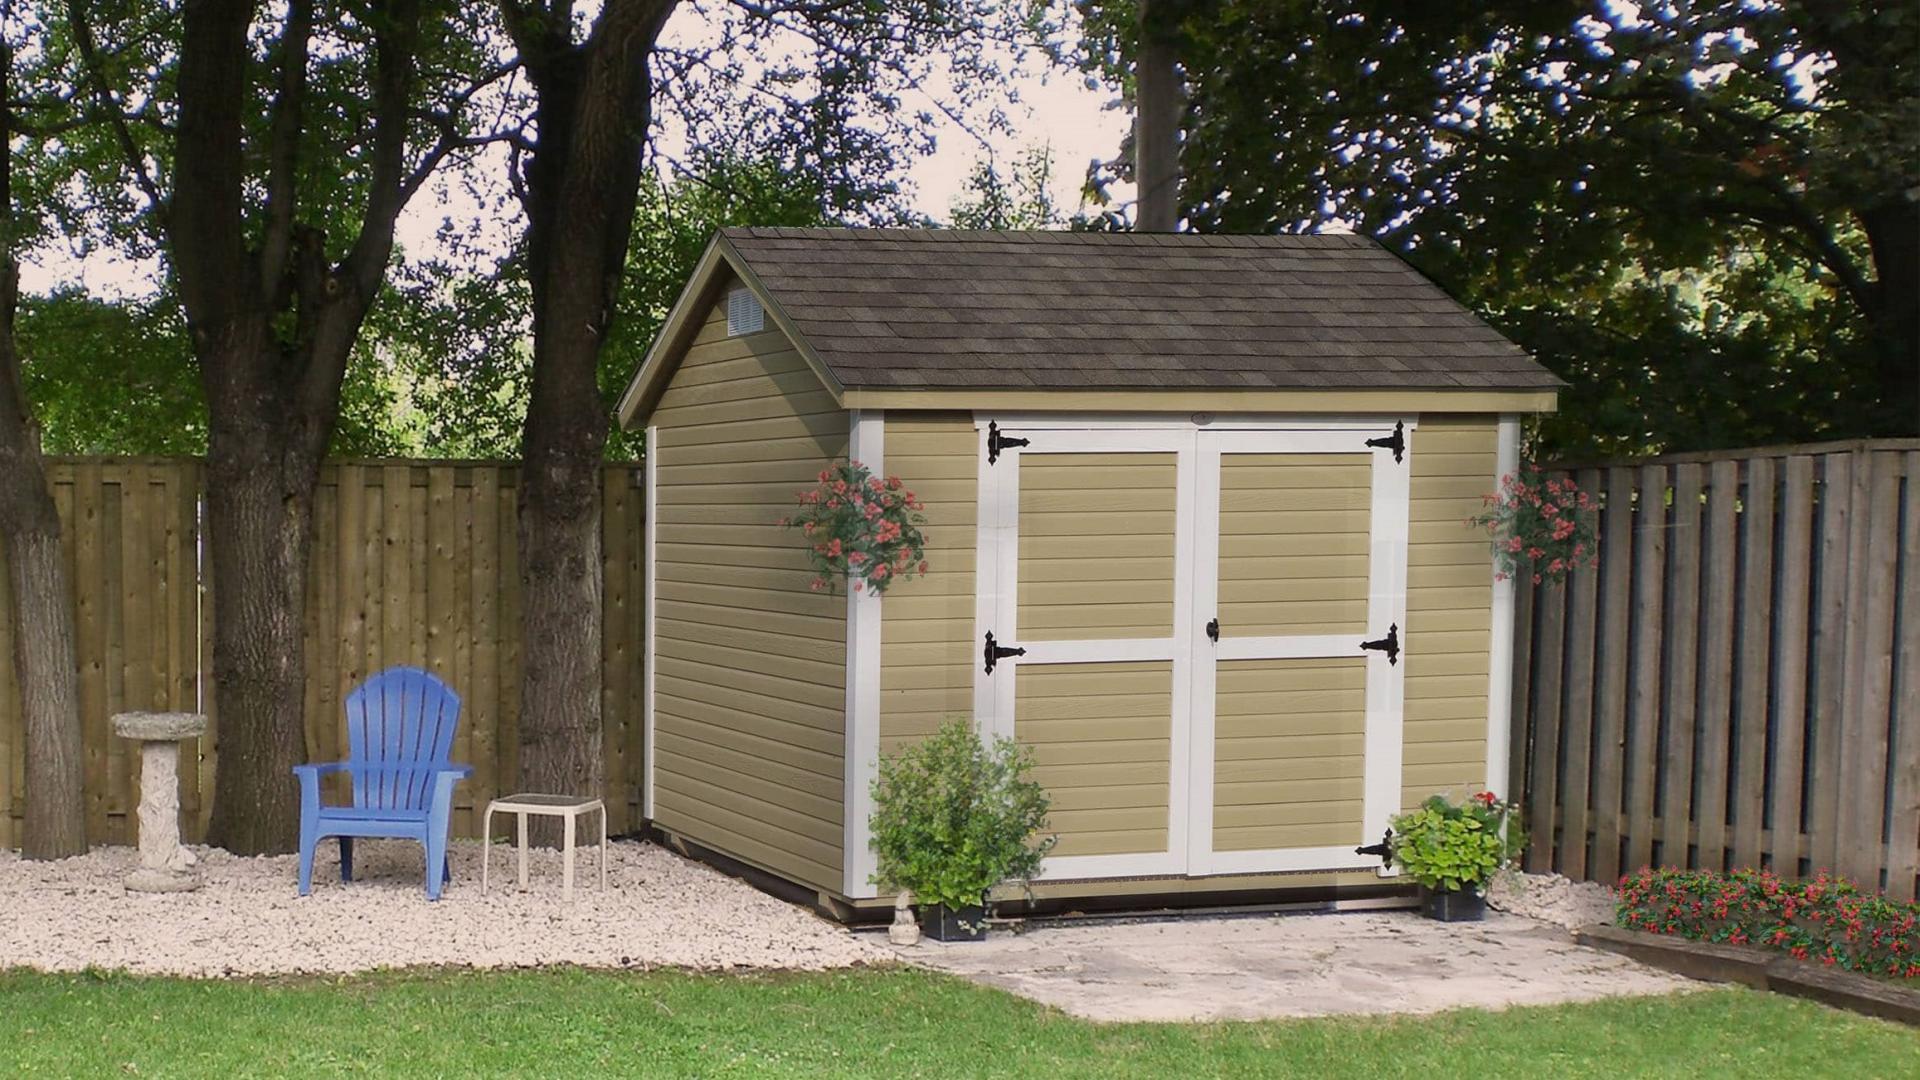 Tan garden shed with white trim in a residential area